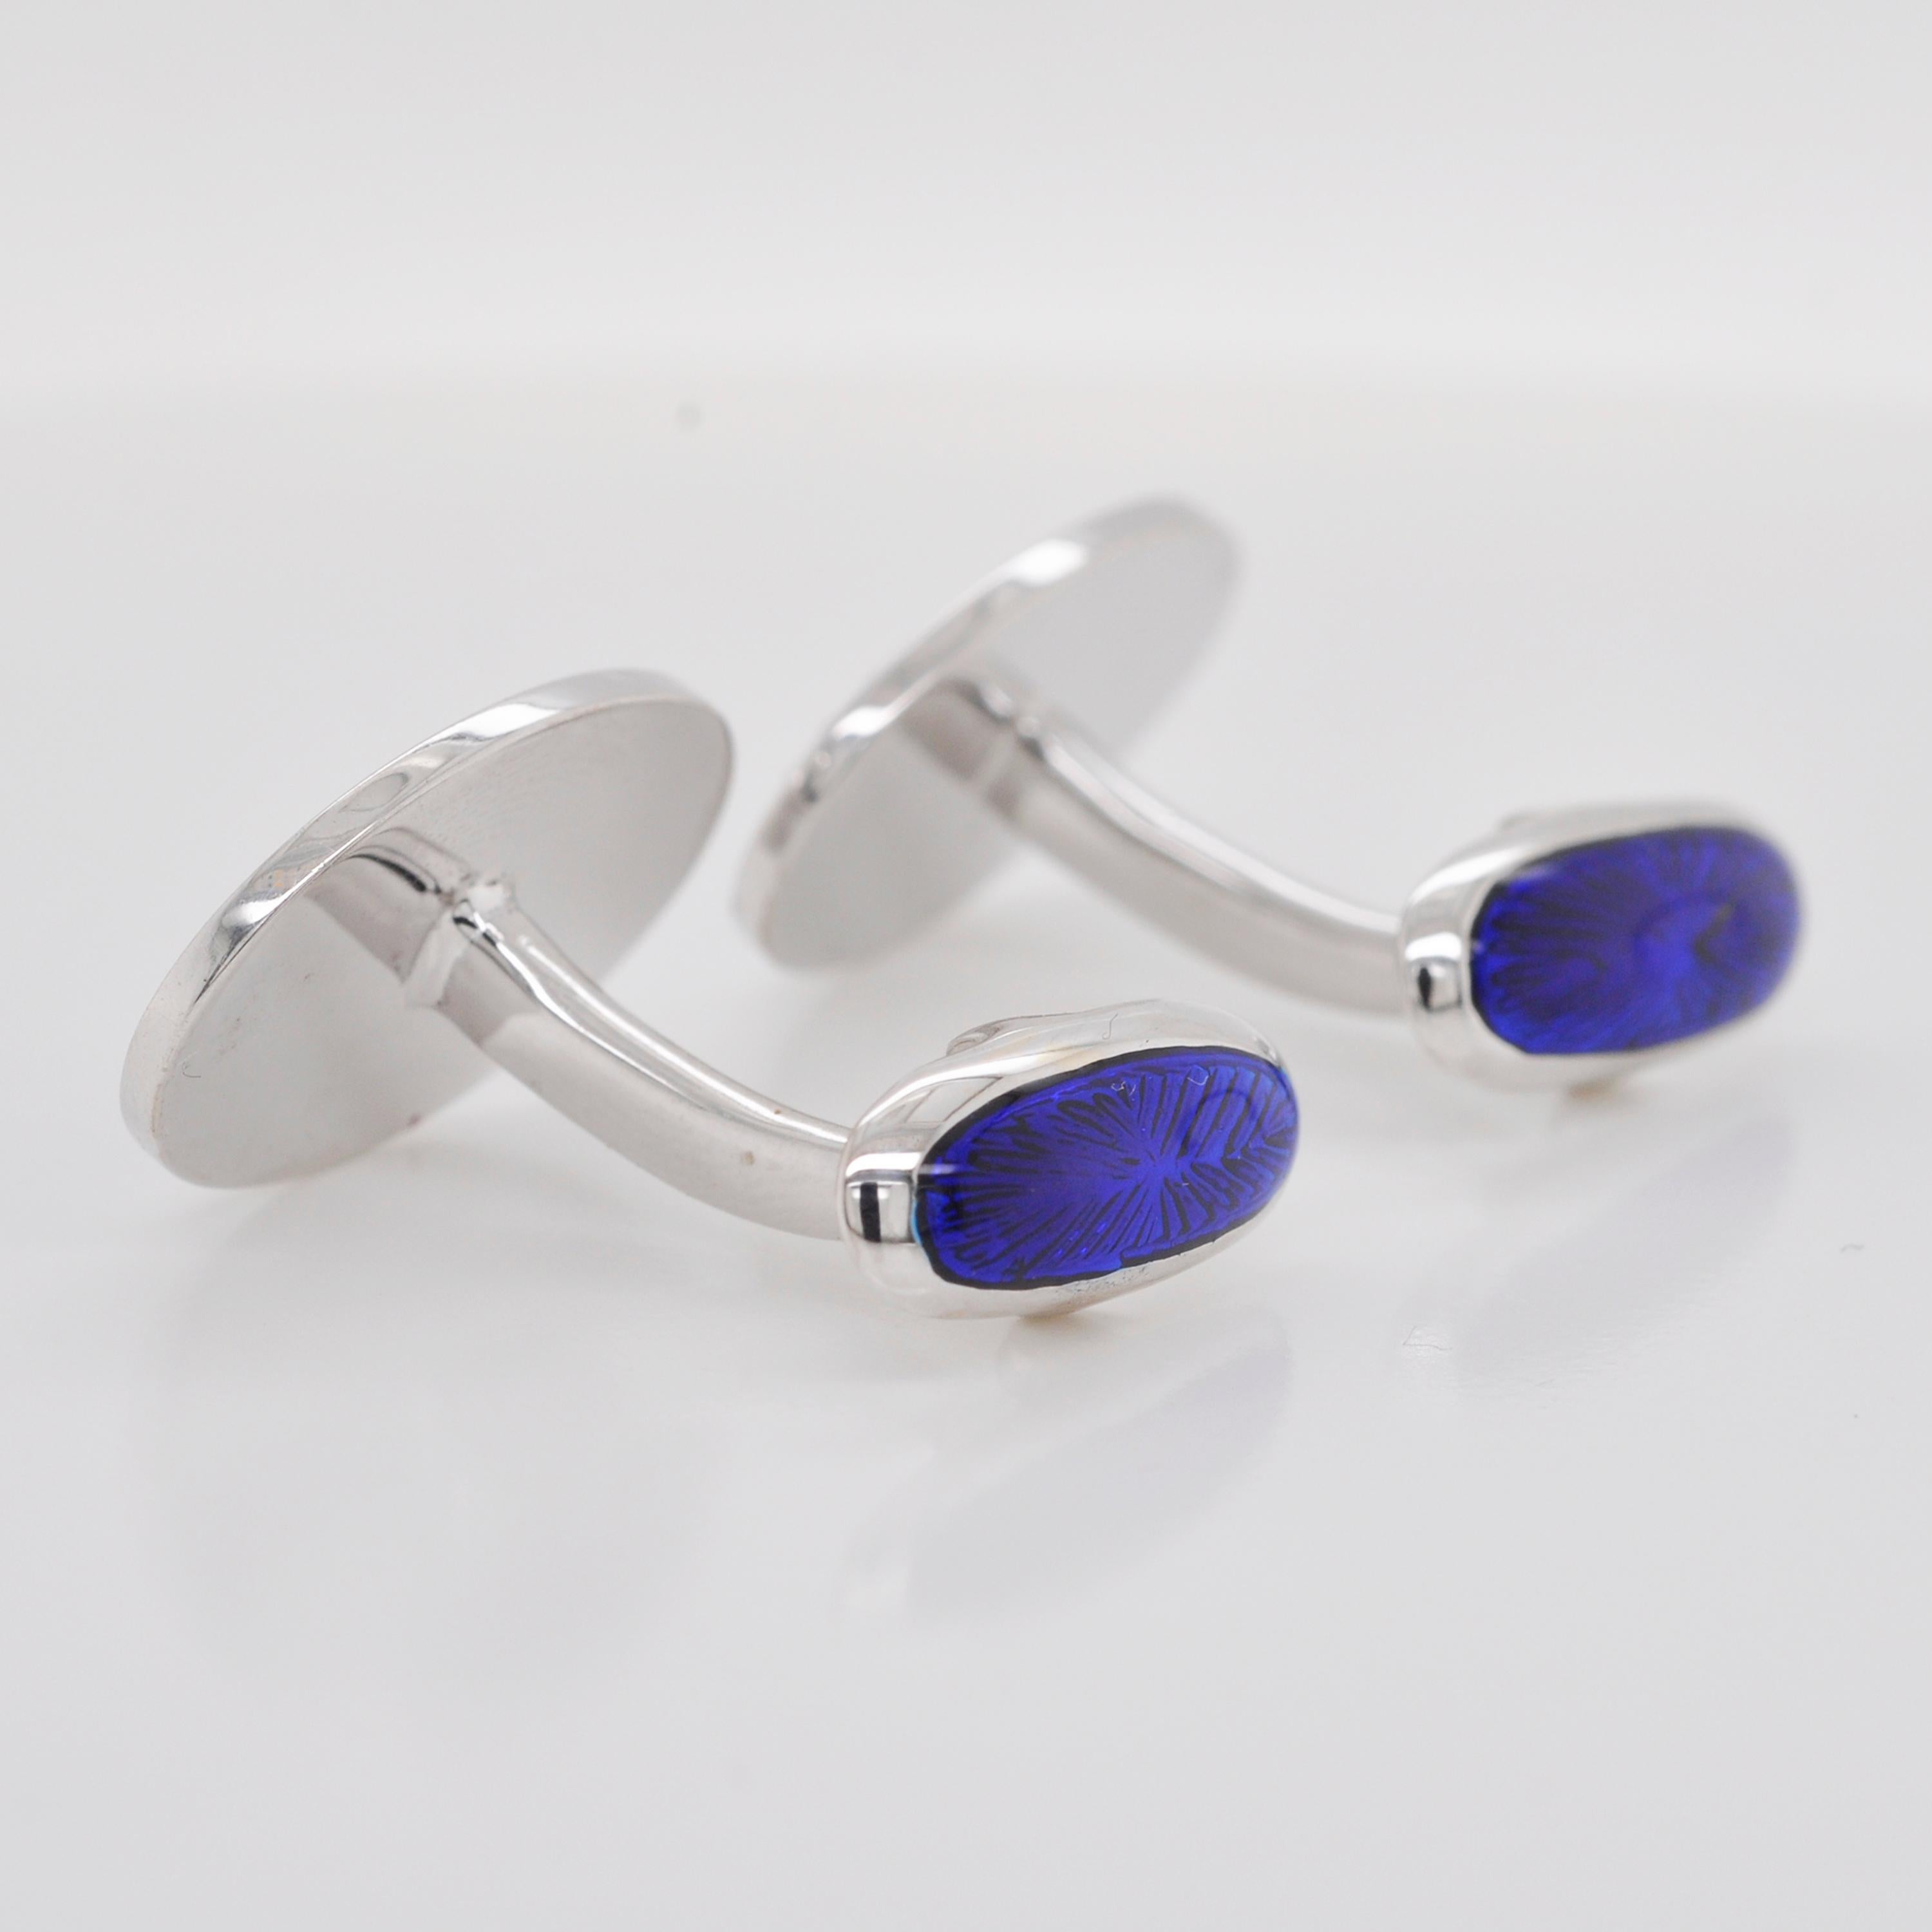 18 Karat White Gold Blue Guilloché Enamel Oval Cufflinks In New Condition For Sale In Jaipur, Rajasthan